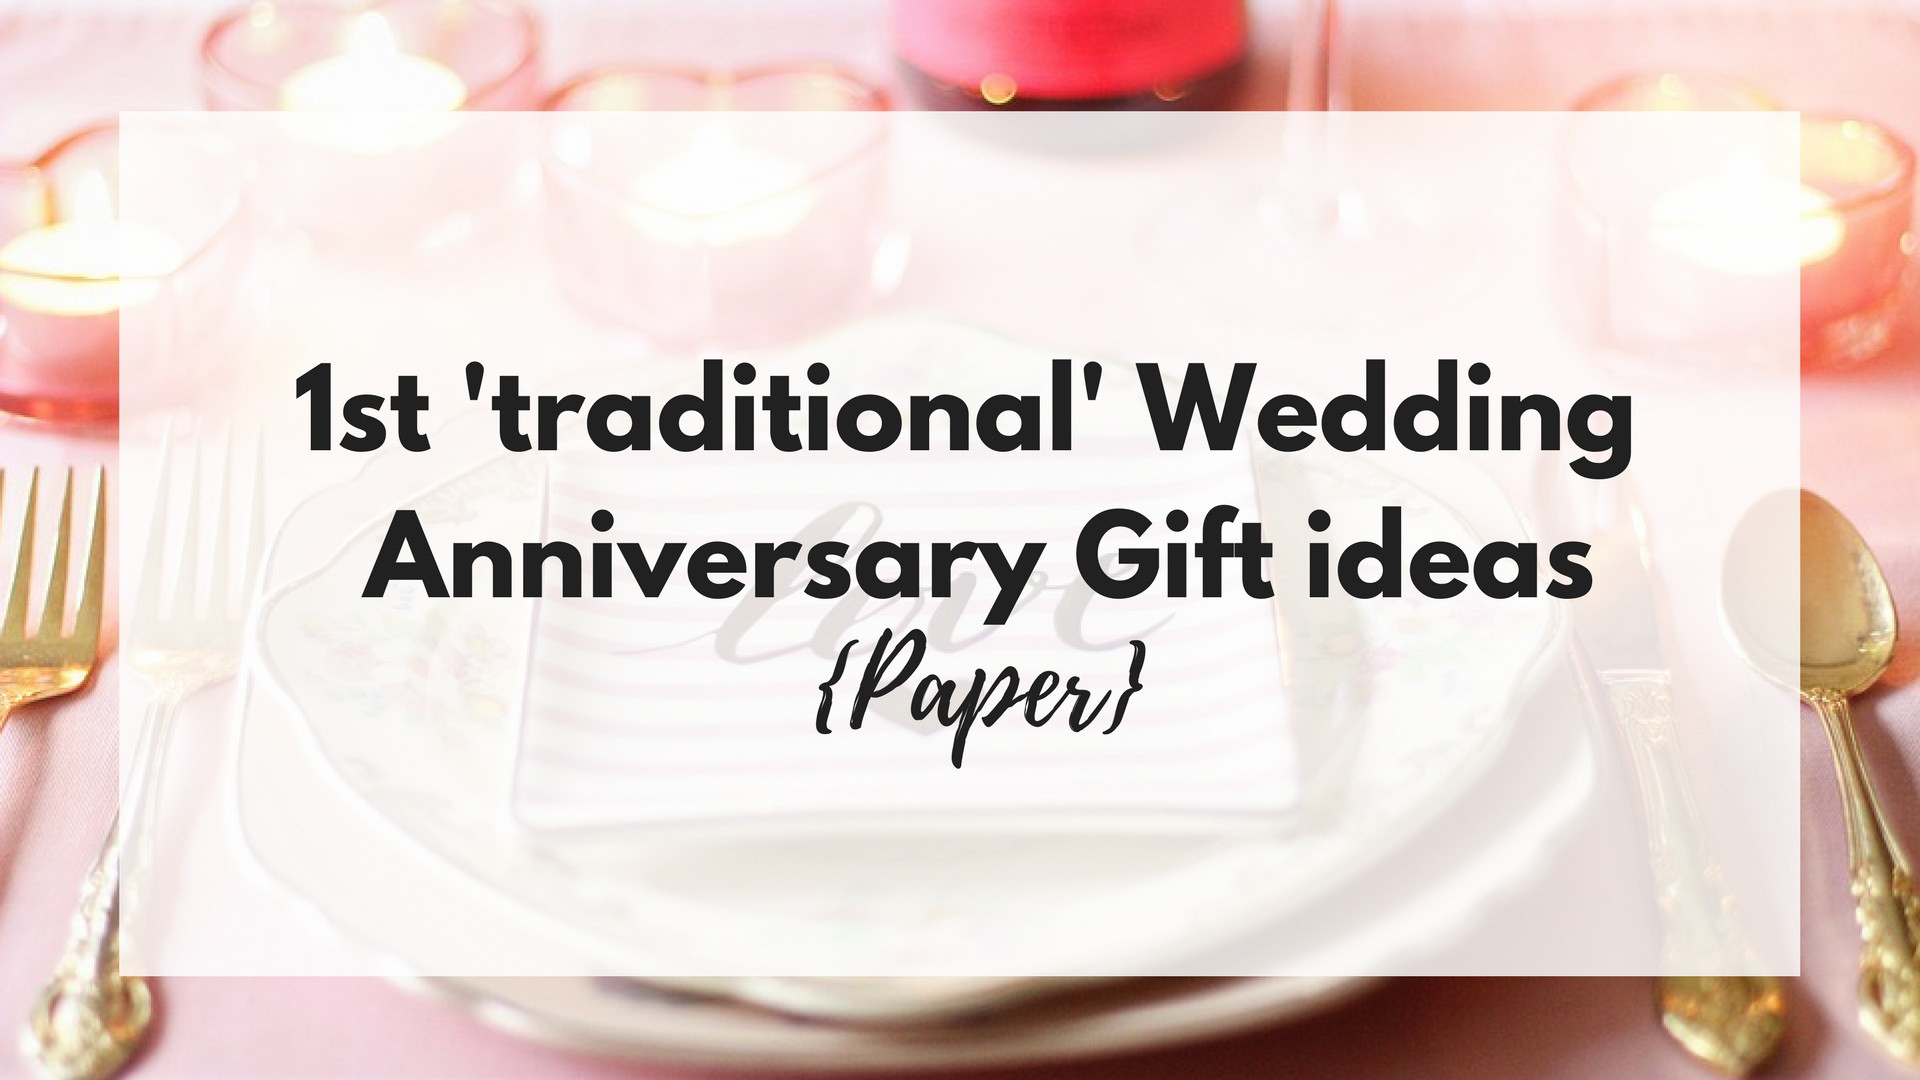 Traditional Anniversary Gift Ideas
 1st ‘traditional’ Wedding Anniversary Gift ideas Paper